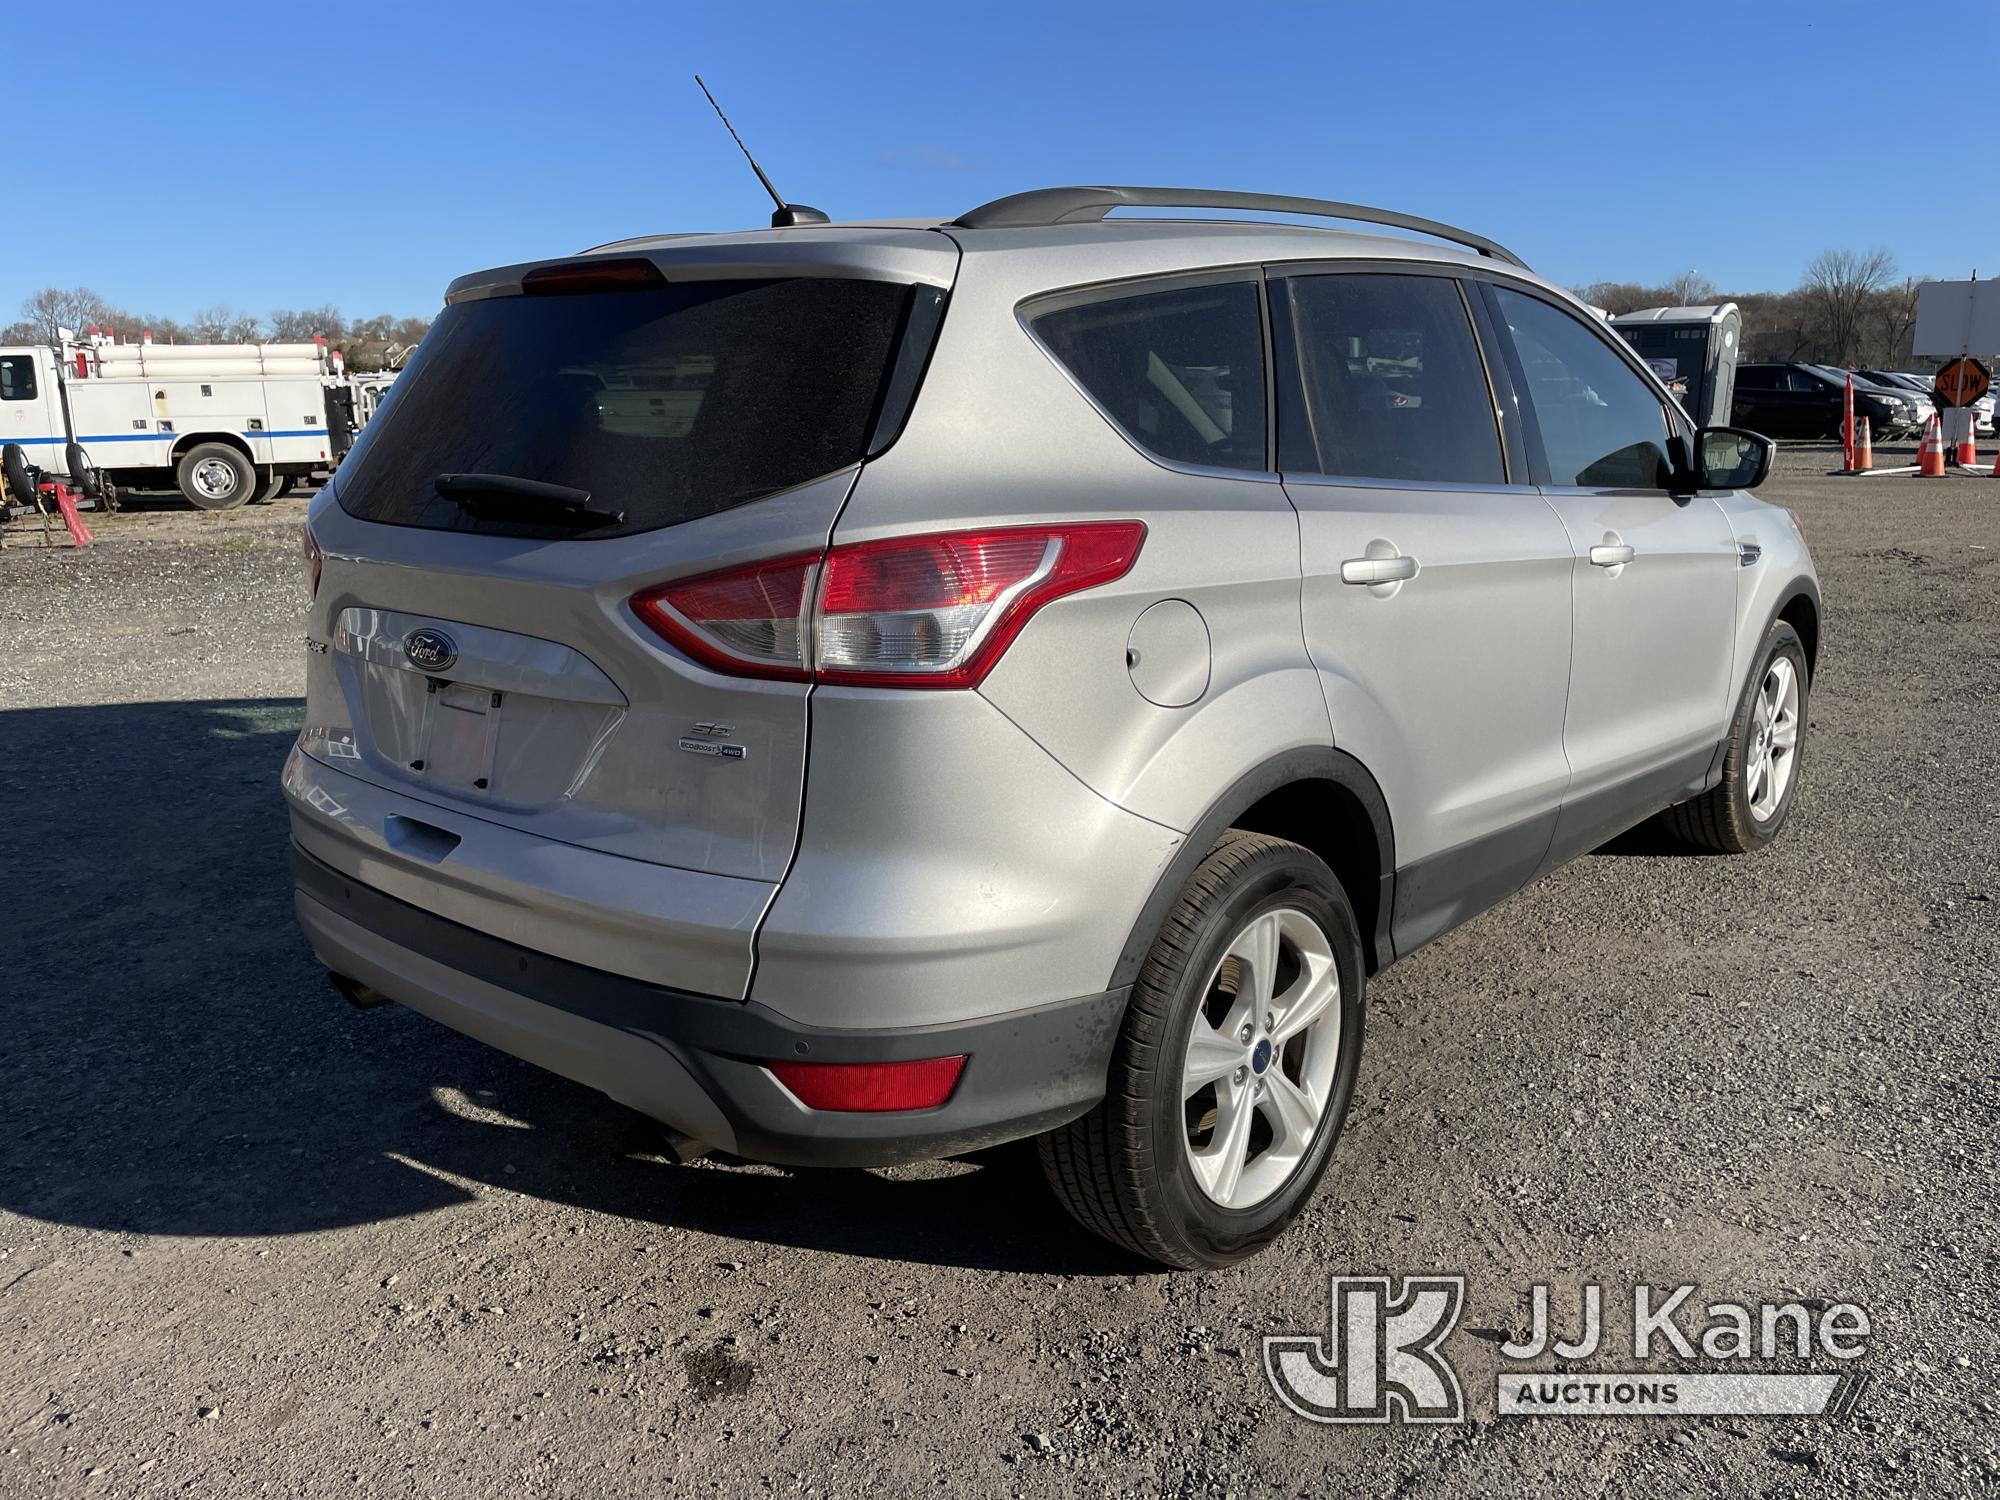 (Plymouth Meeting, PA) 2016 Ford Escape 4x4 4-Door Sport Utility Vehicle Runs & Moves, Minor Body &